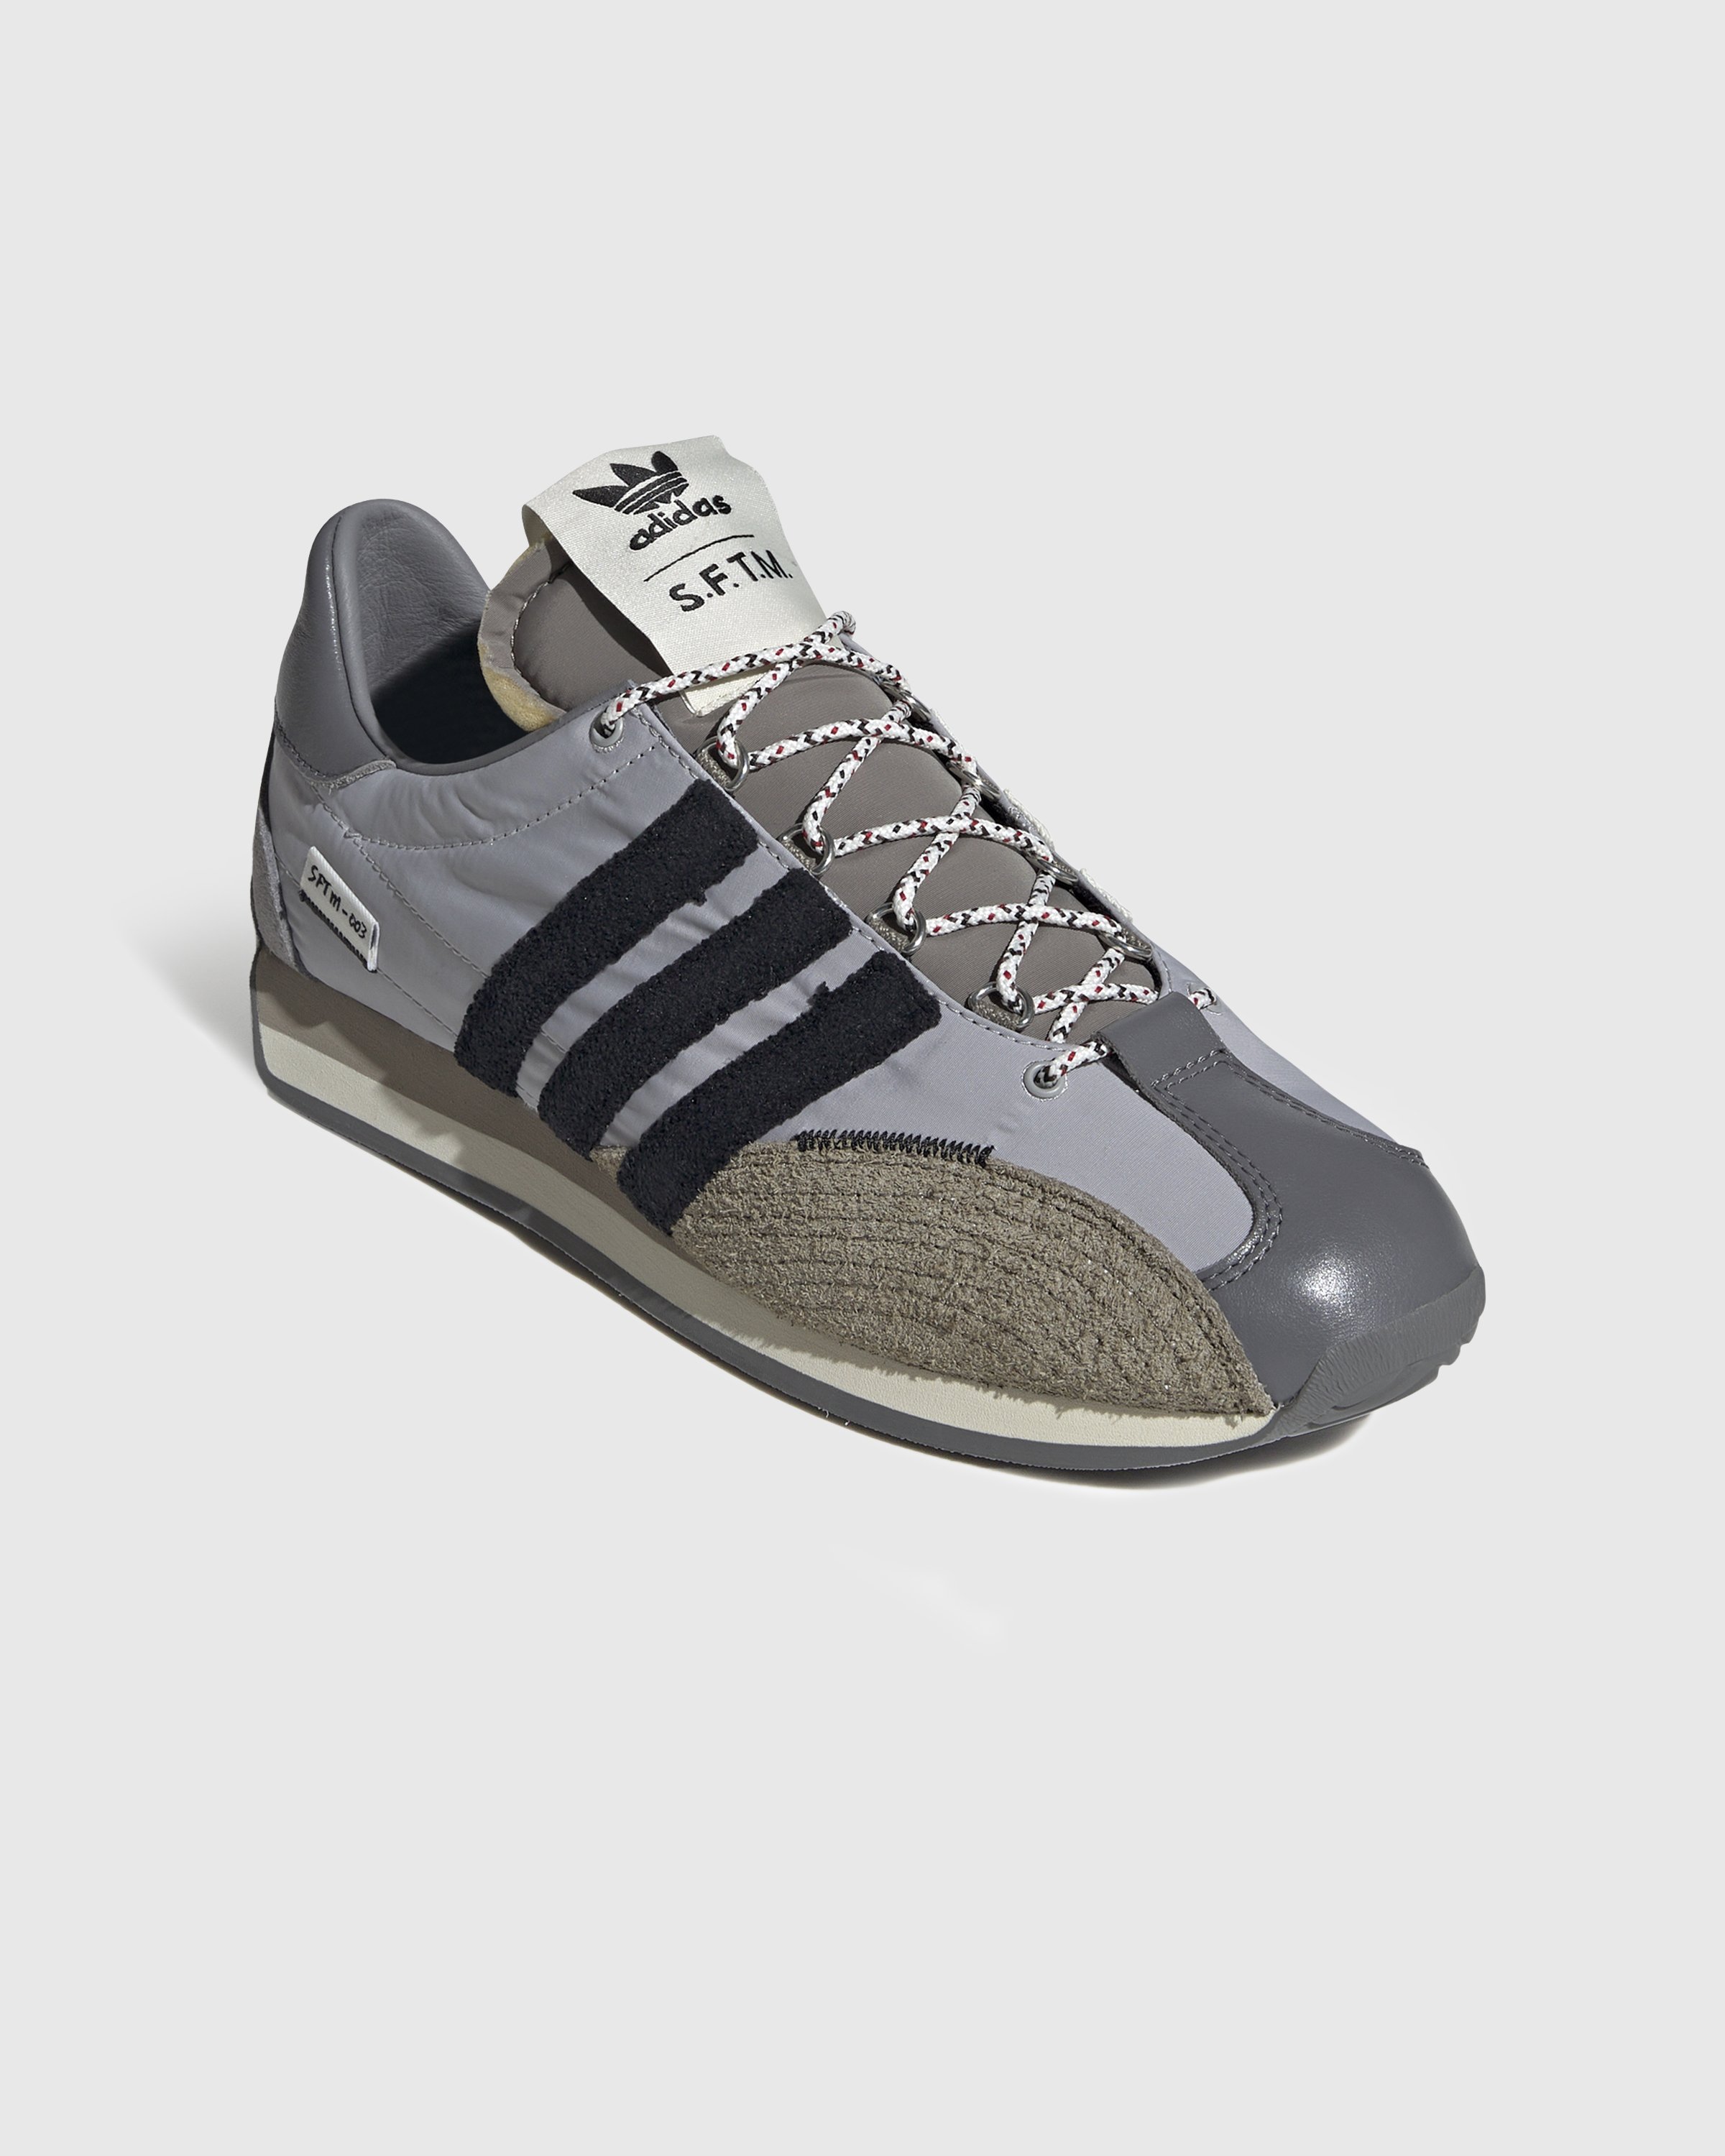 Adidas x Song For The Mute – Country OG SFTM Grey | Highsnobiety Shop